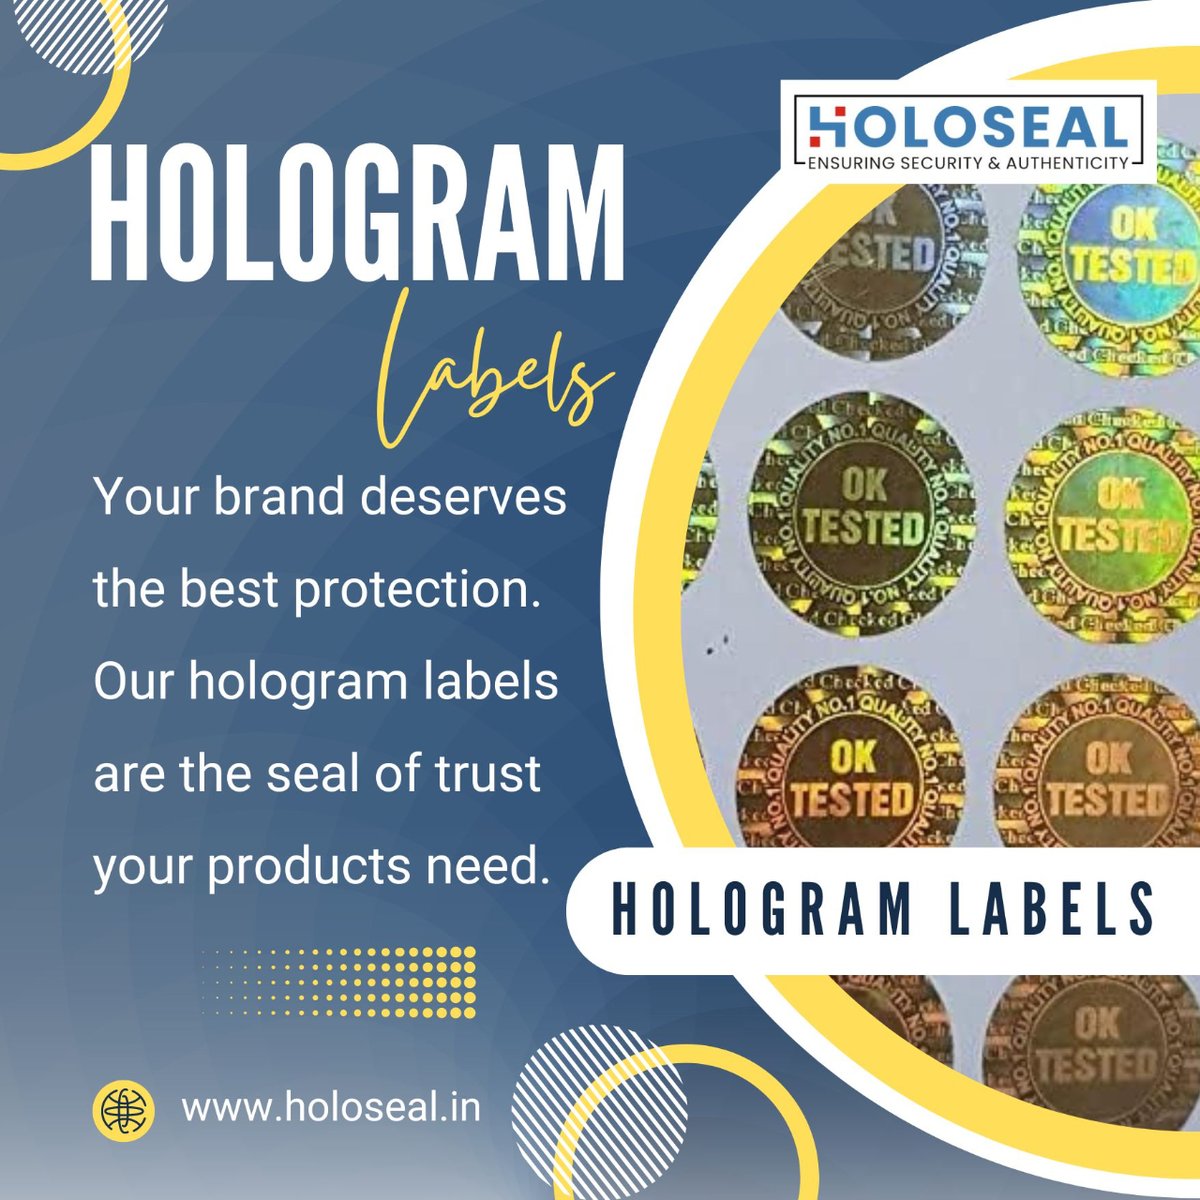 'Your brand deserves the best protection. Our hologram labels are the seal of trust your products need. #BrandTrust #ProductProtection #Holoseal'

i.mtr.cool/vqkxmgiyni